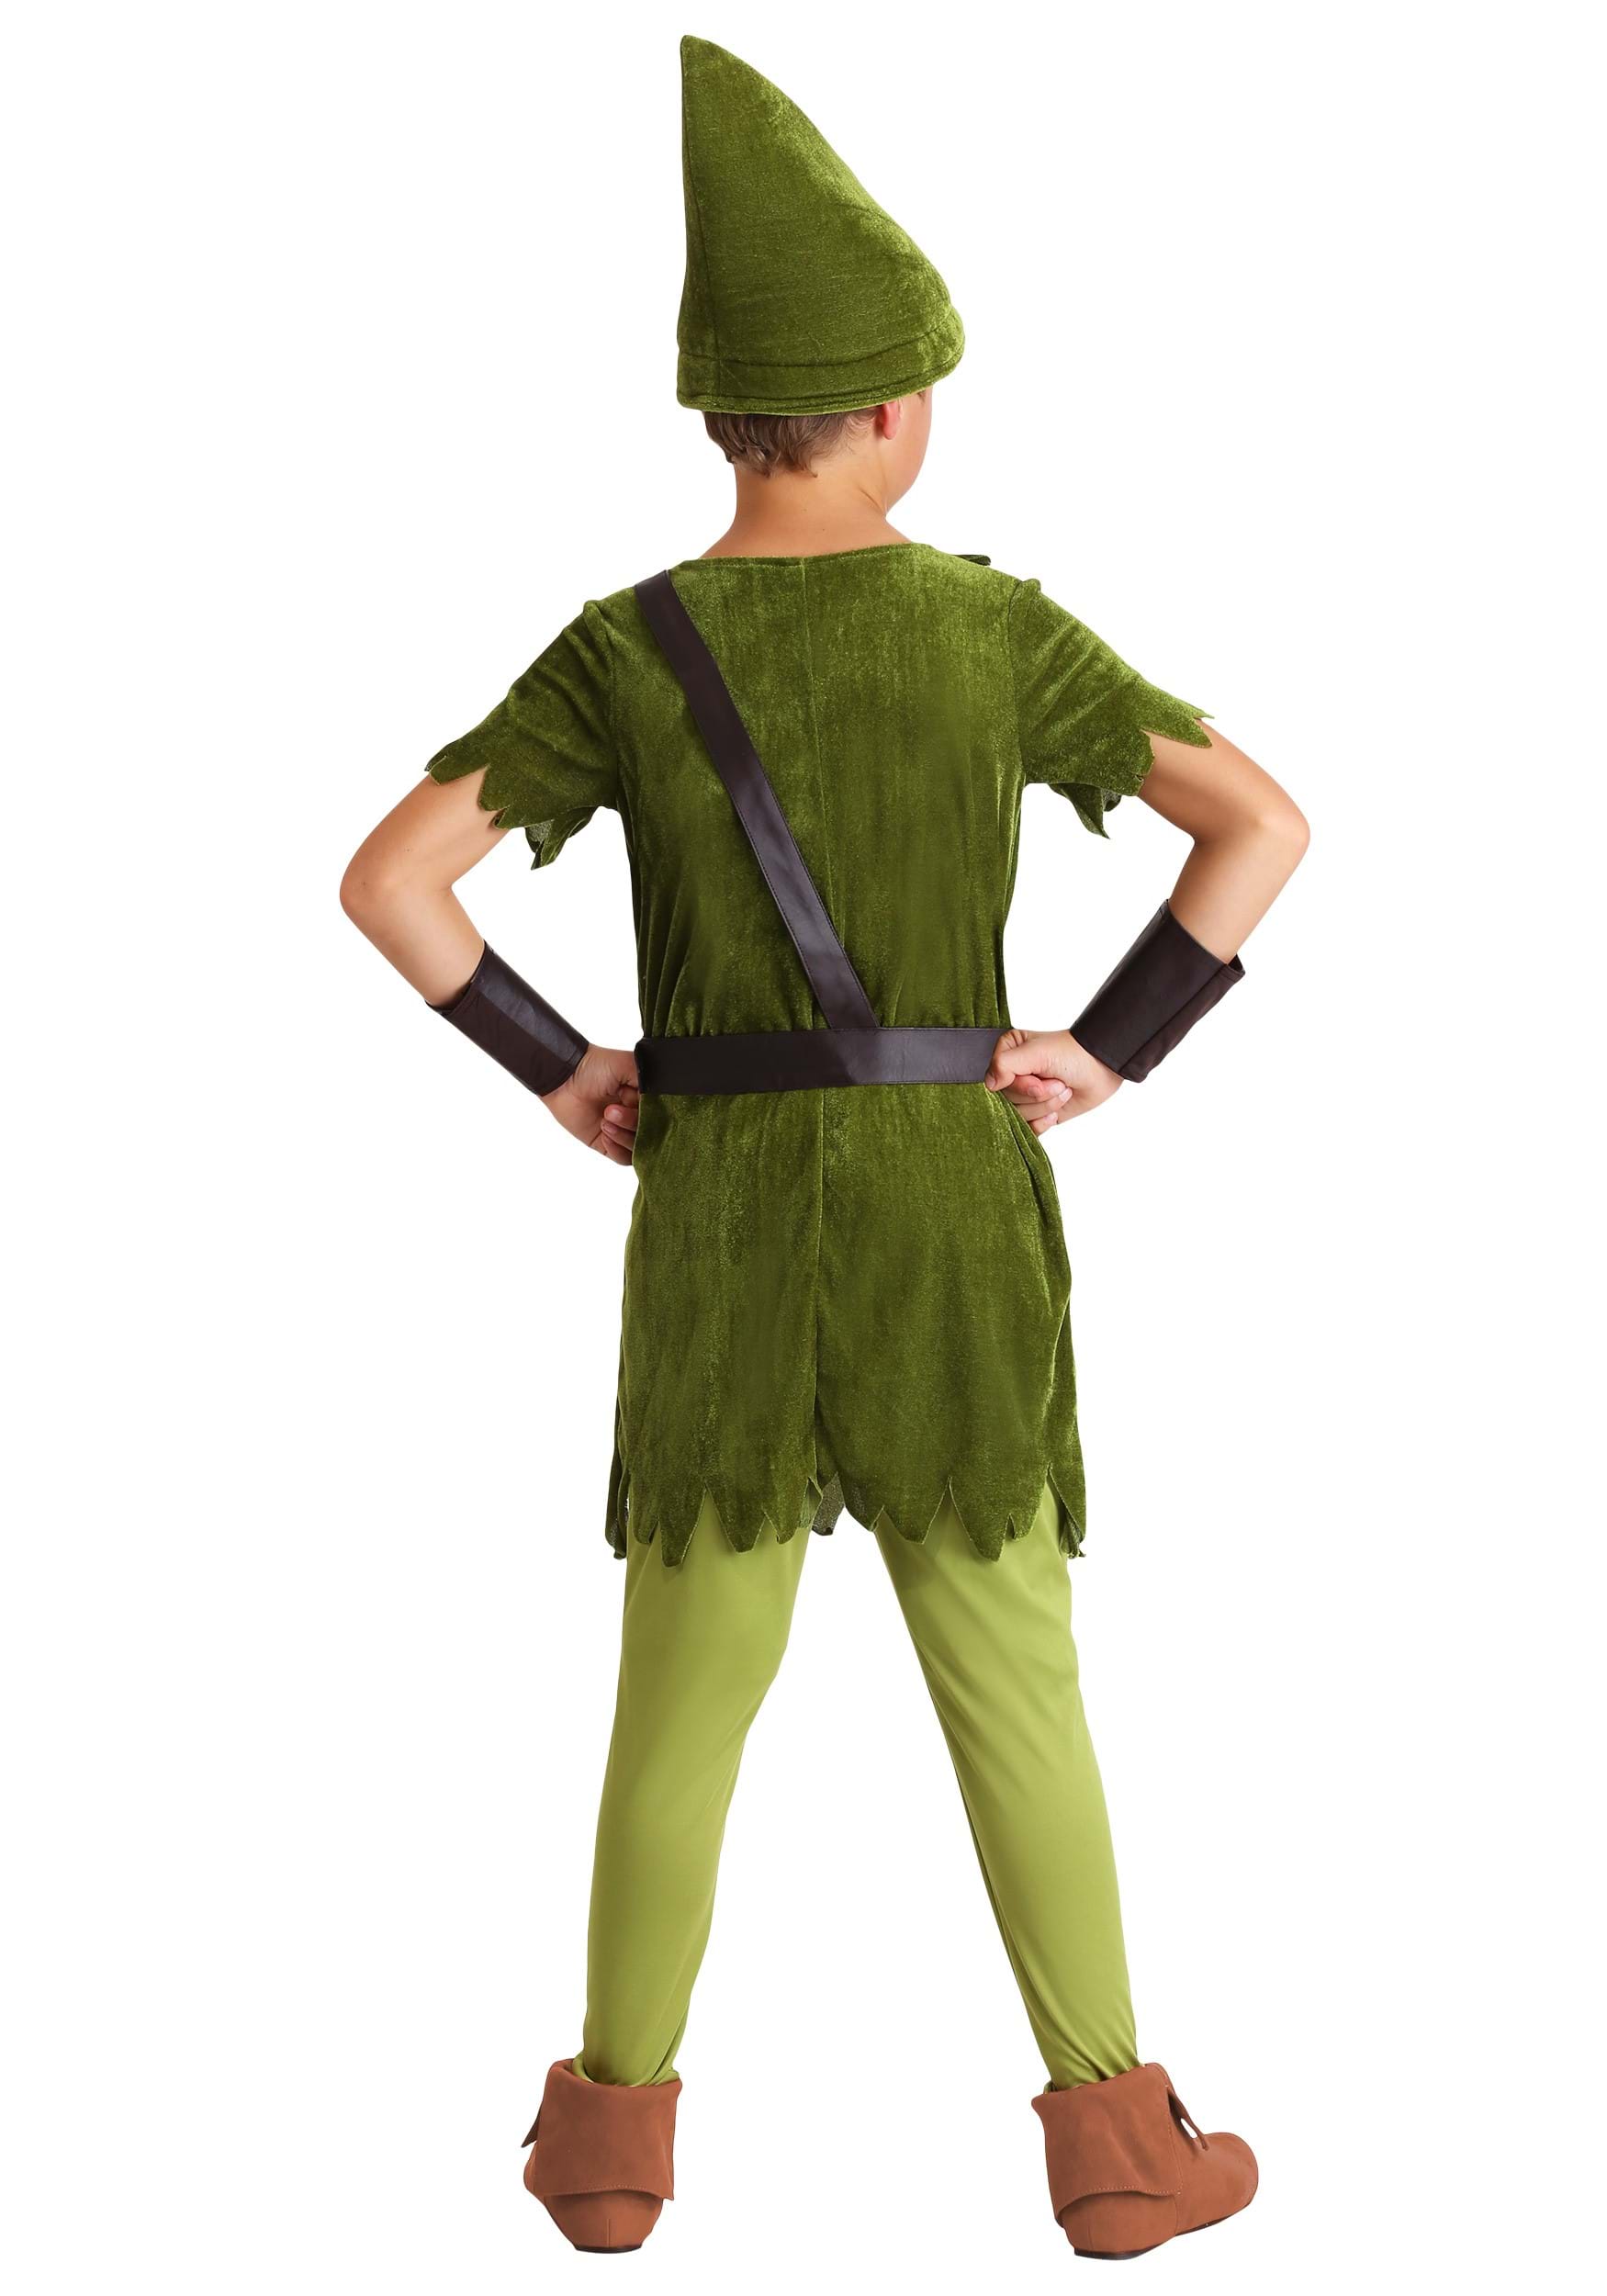 Kid's Peter Pan Costume With Hat, Shirt, Tights, Belt/Harness And Wrist Cuffs